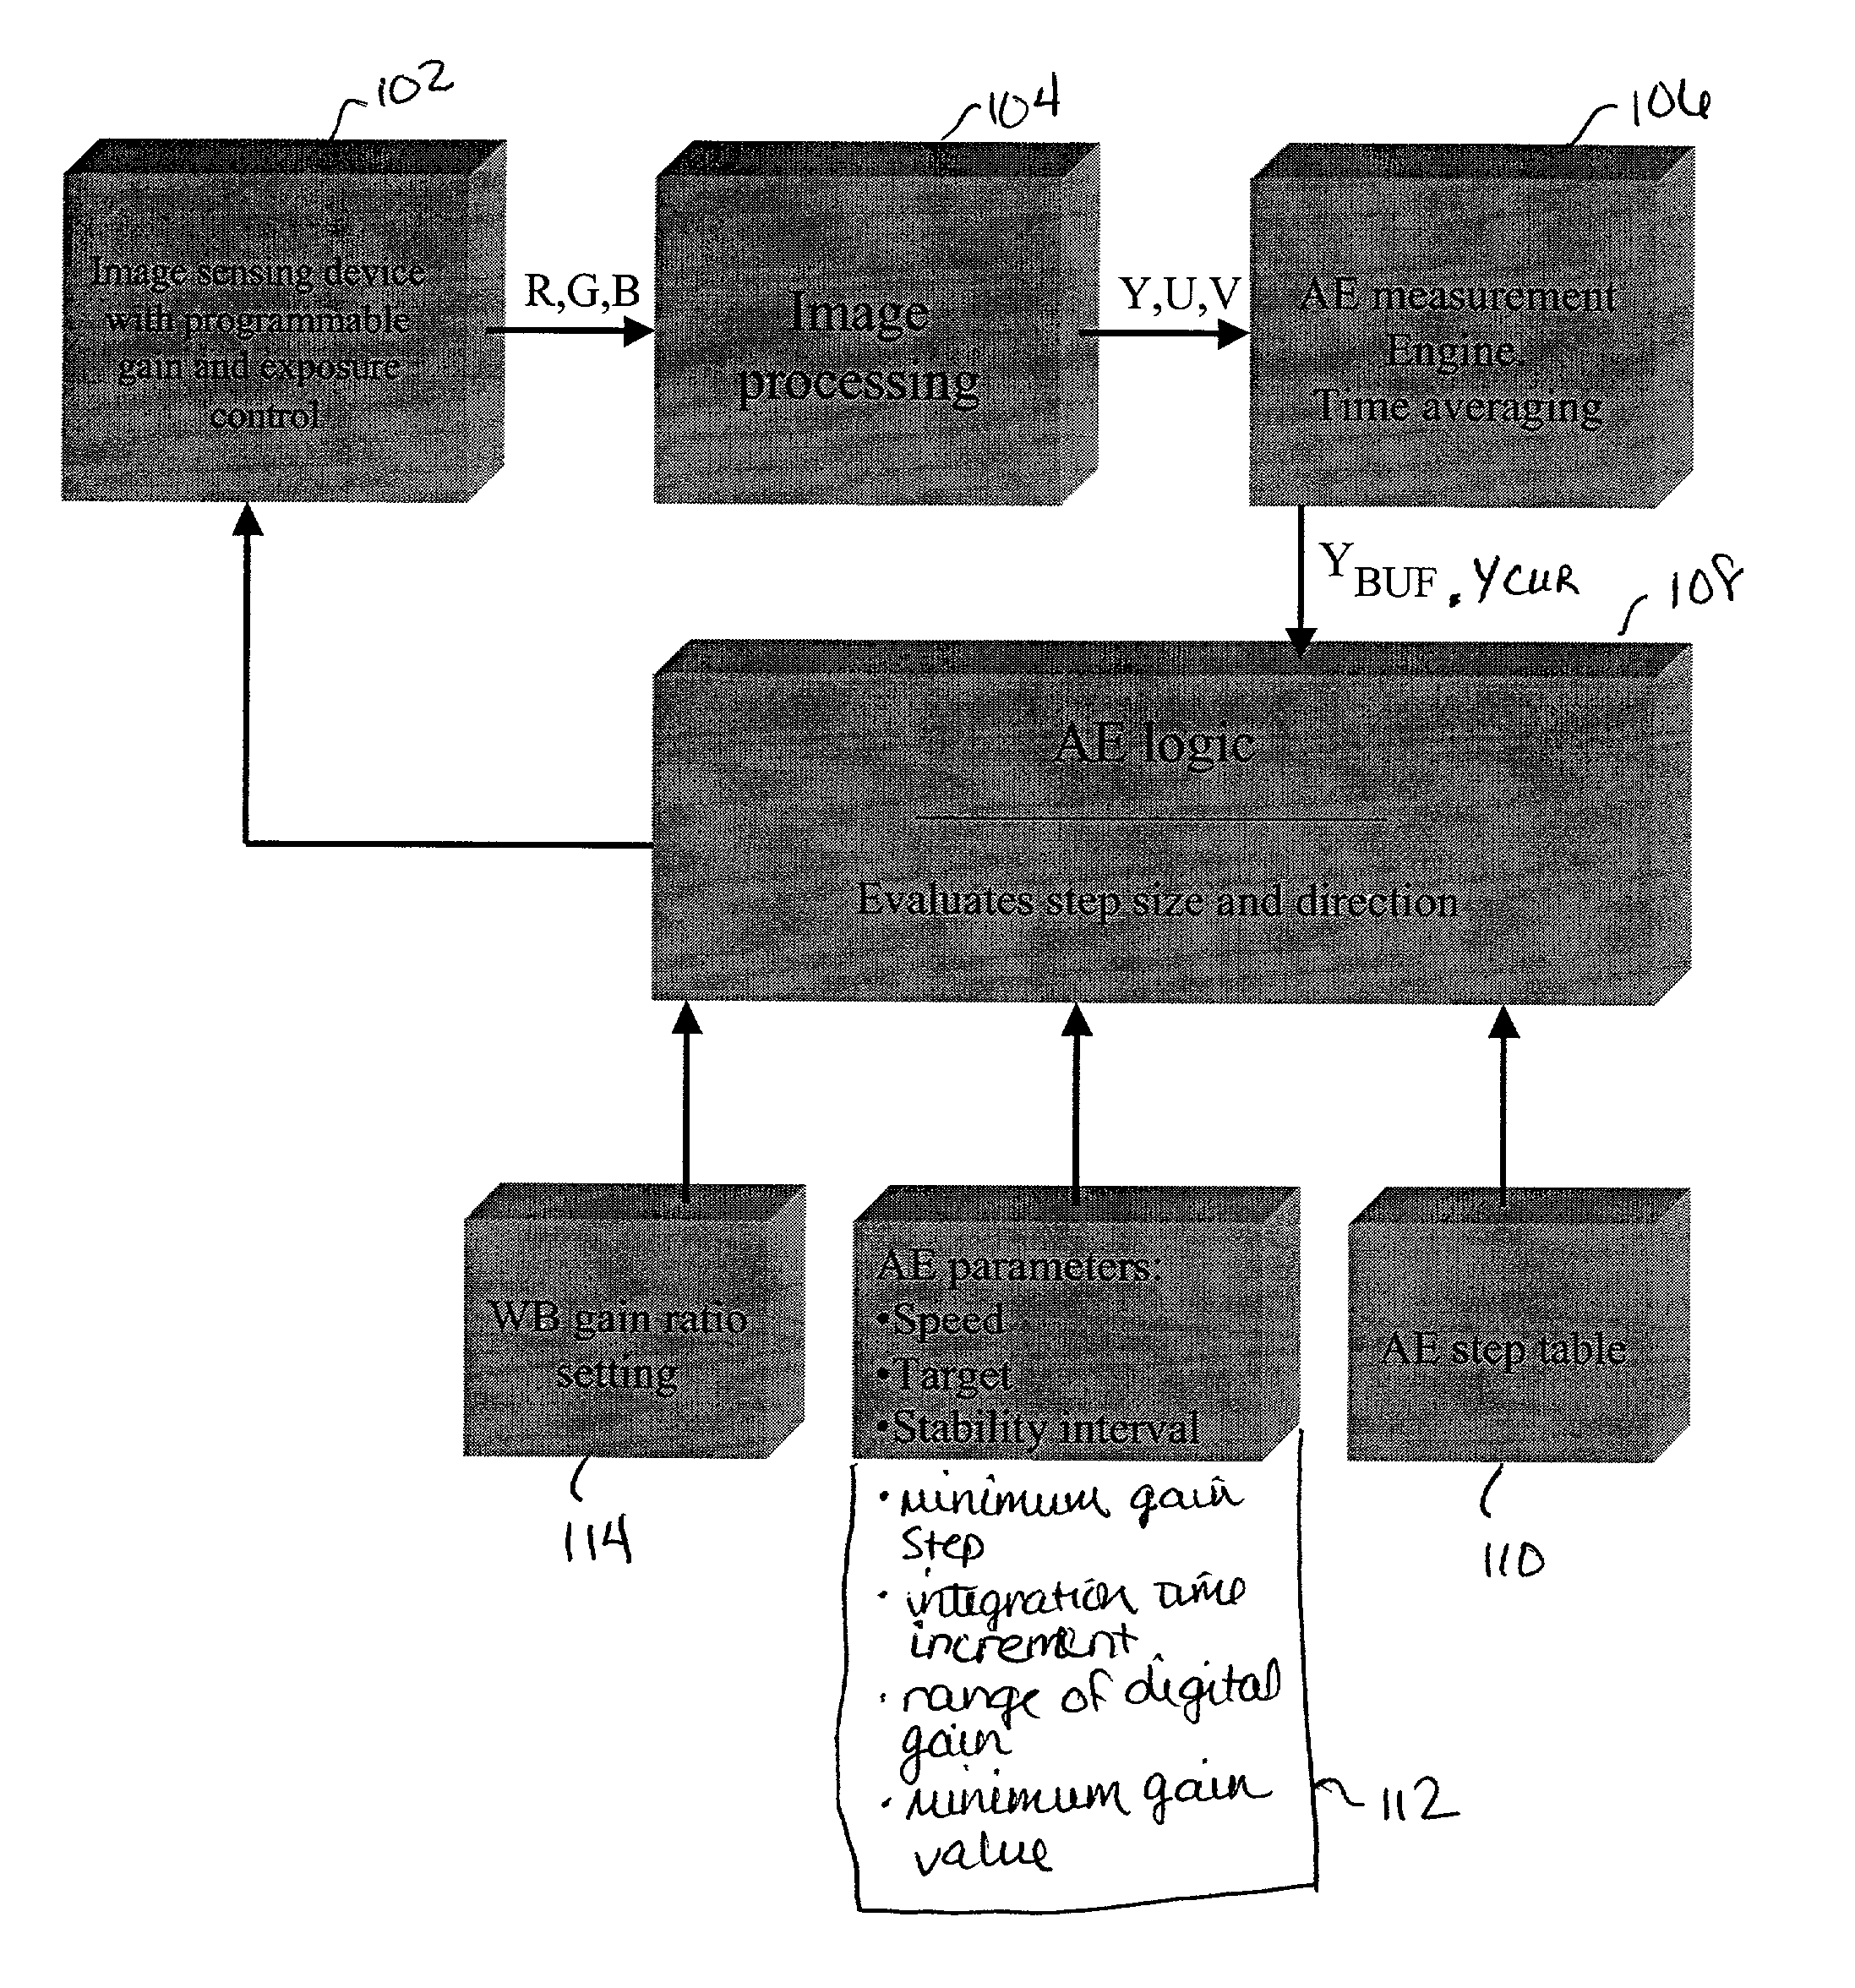 Method and apparatus for automatic gain and exposure control for maintaining target image brightness in video imager systems